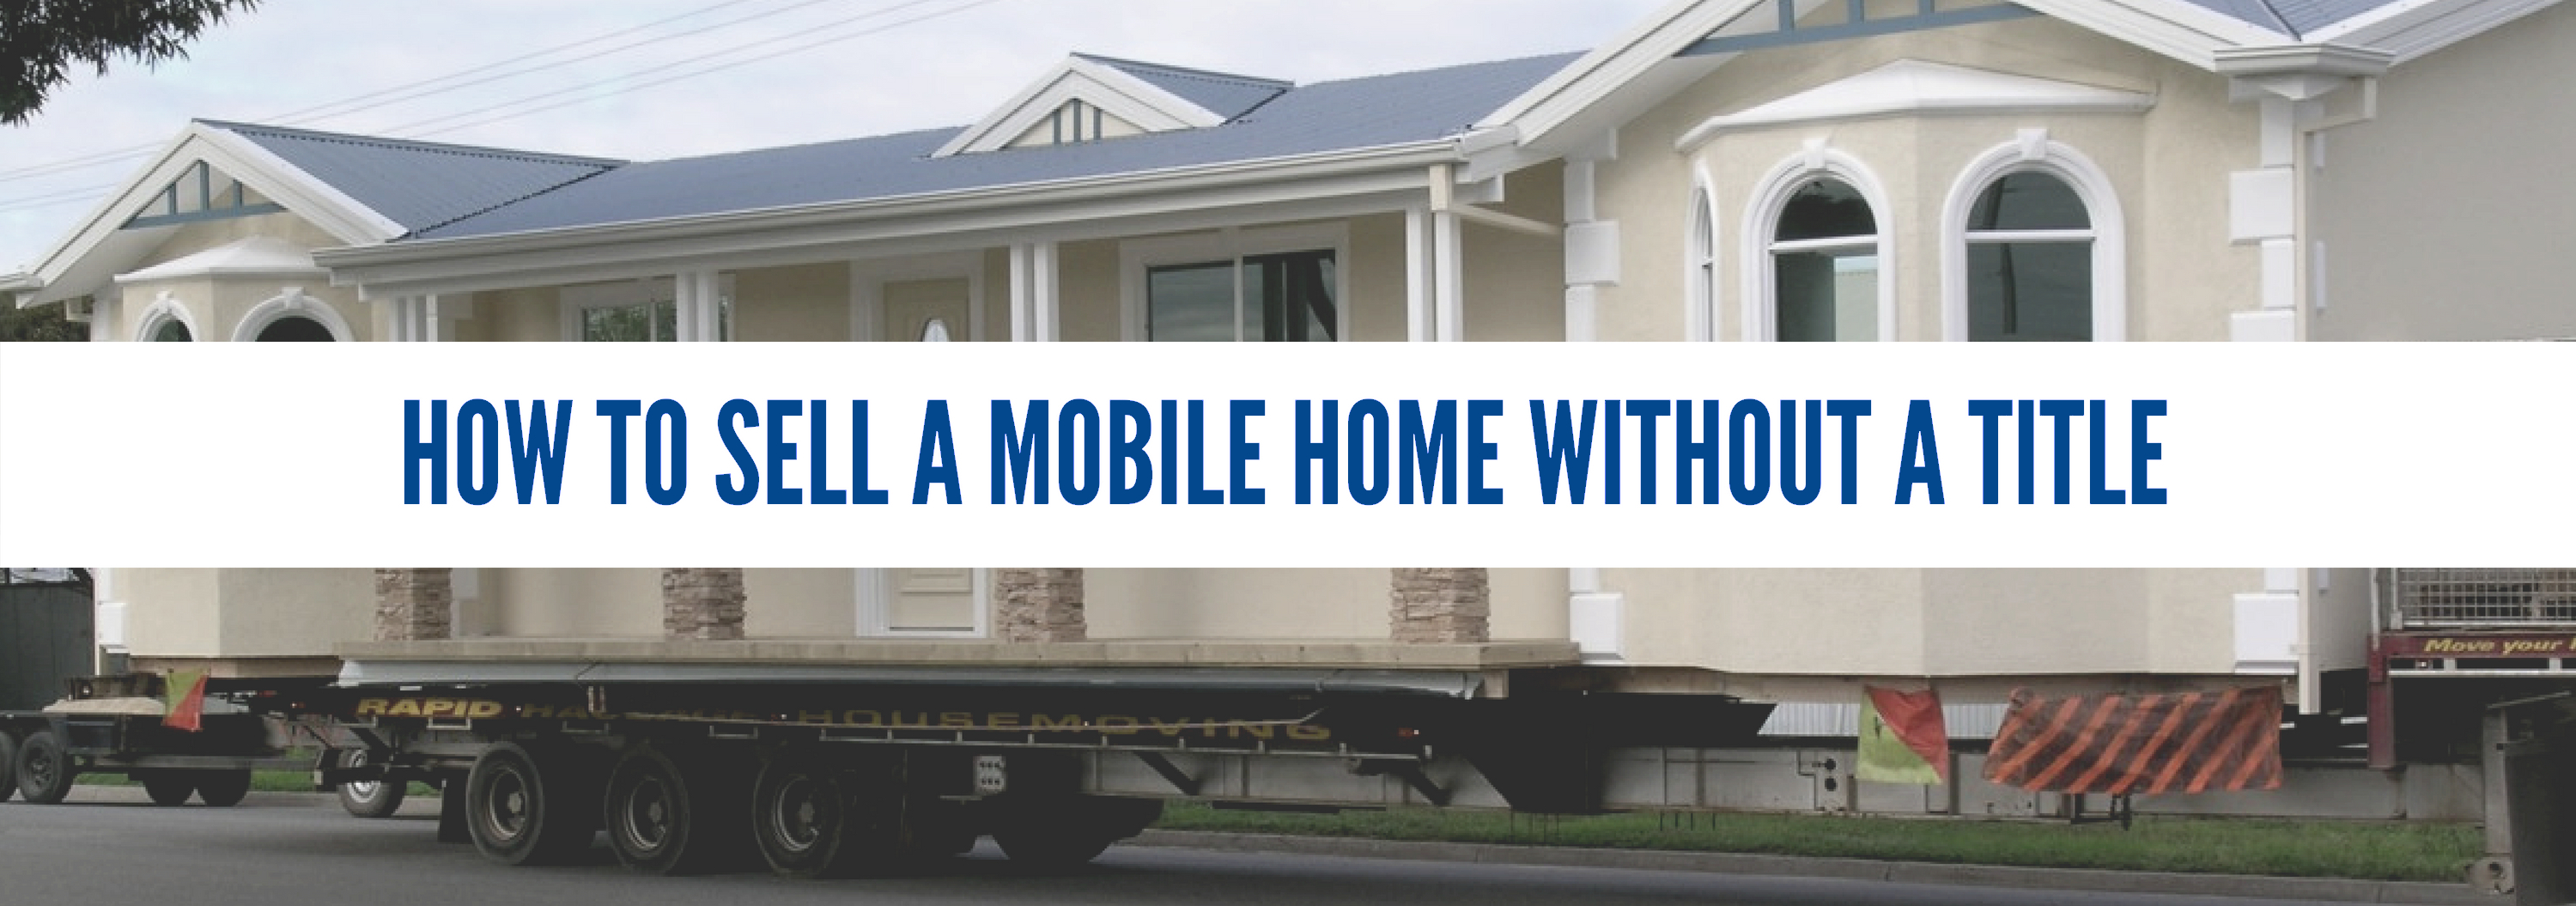 how-long-does-it-take-to-transfer-a-mobile-home-title-www